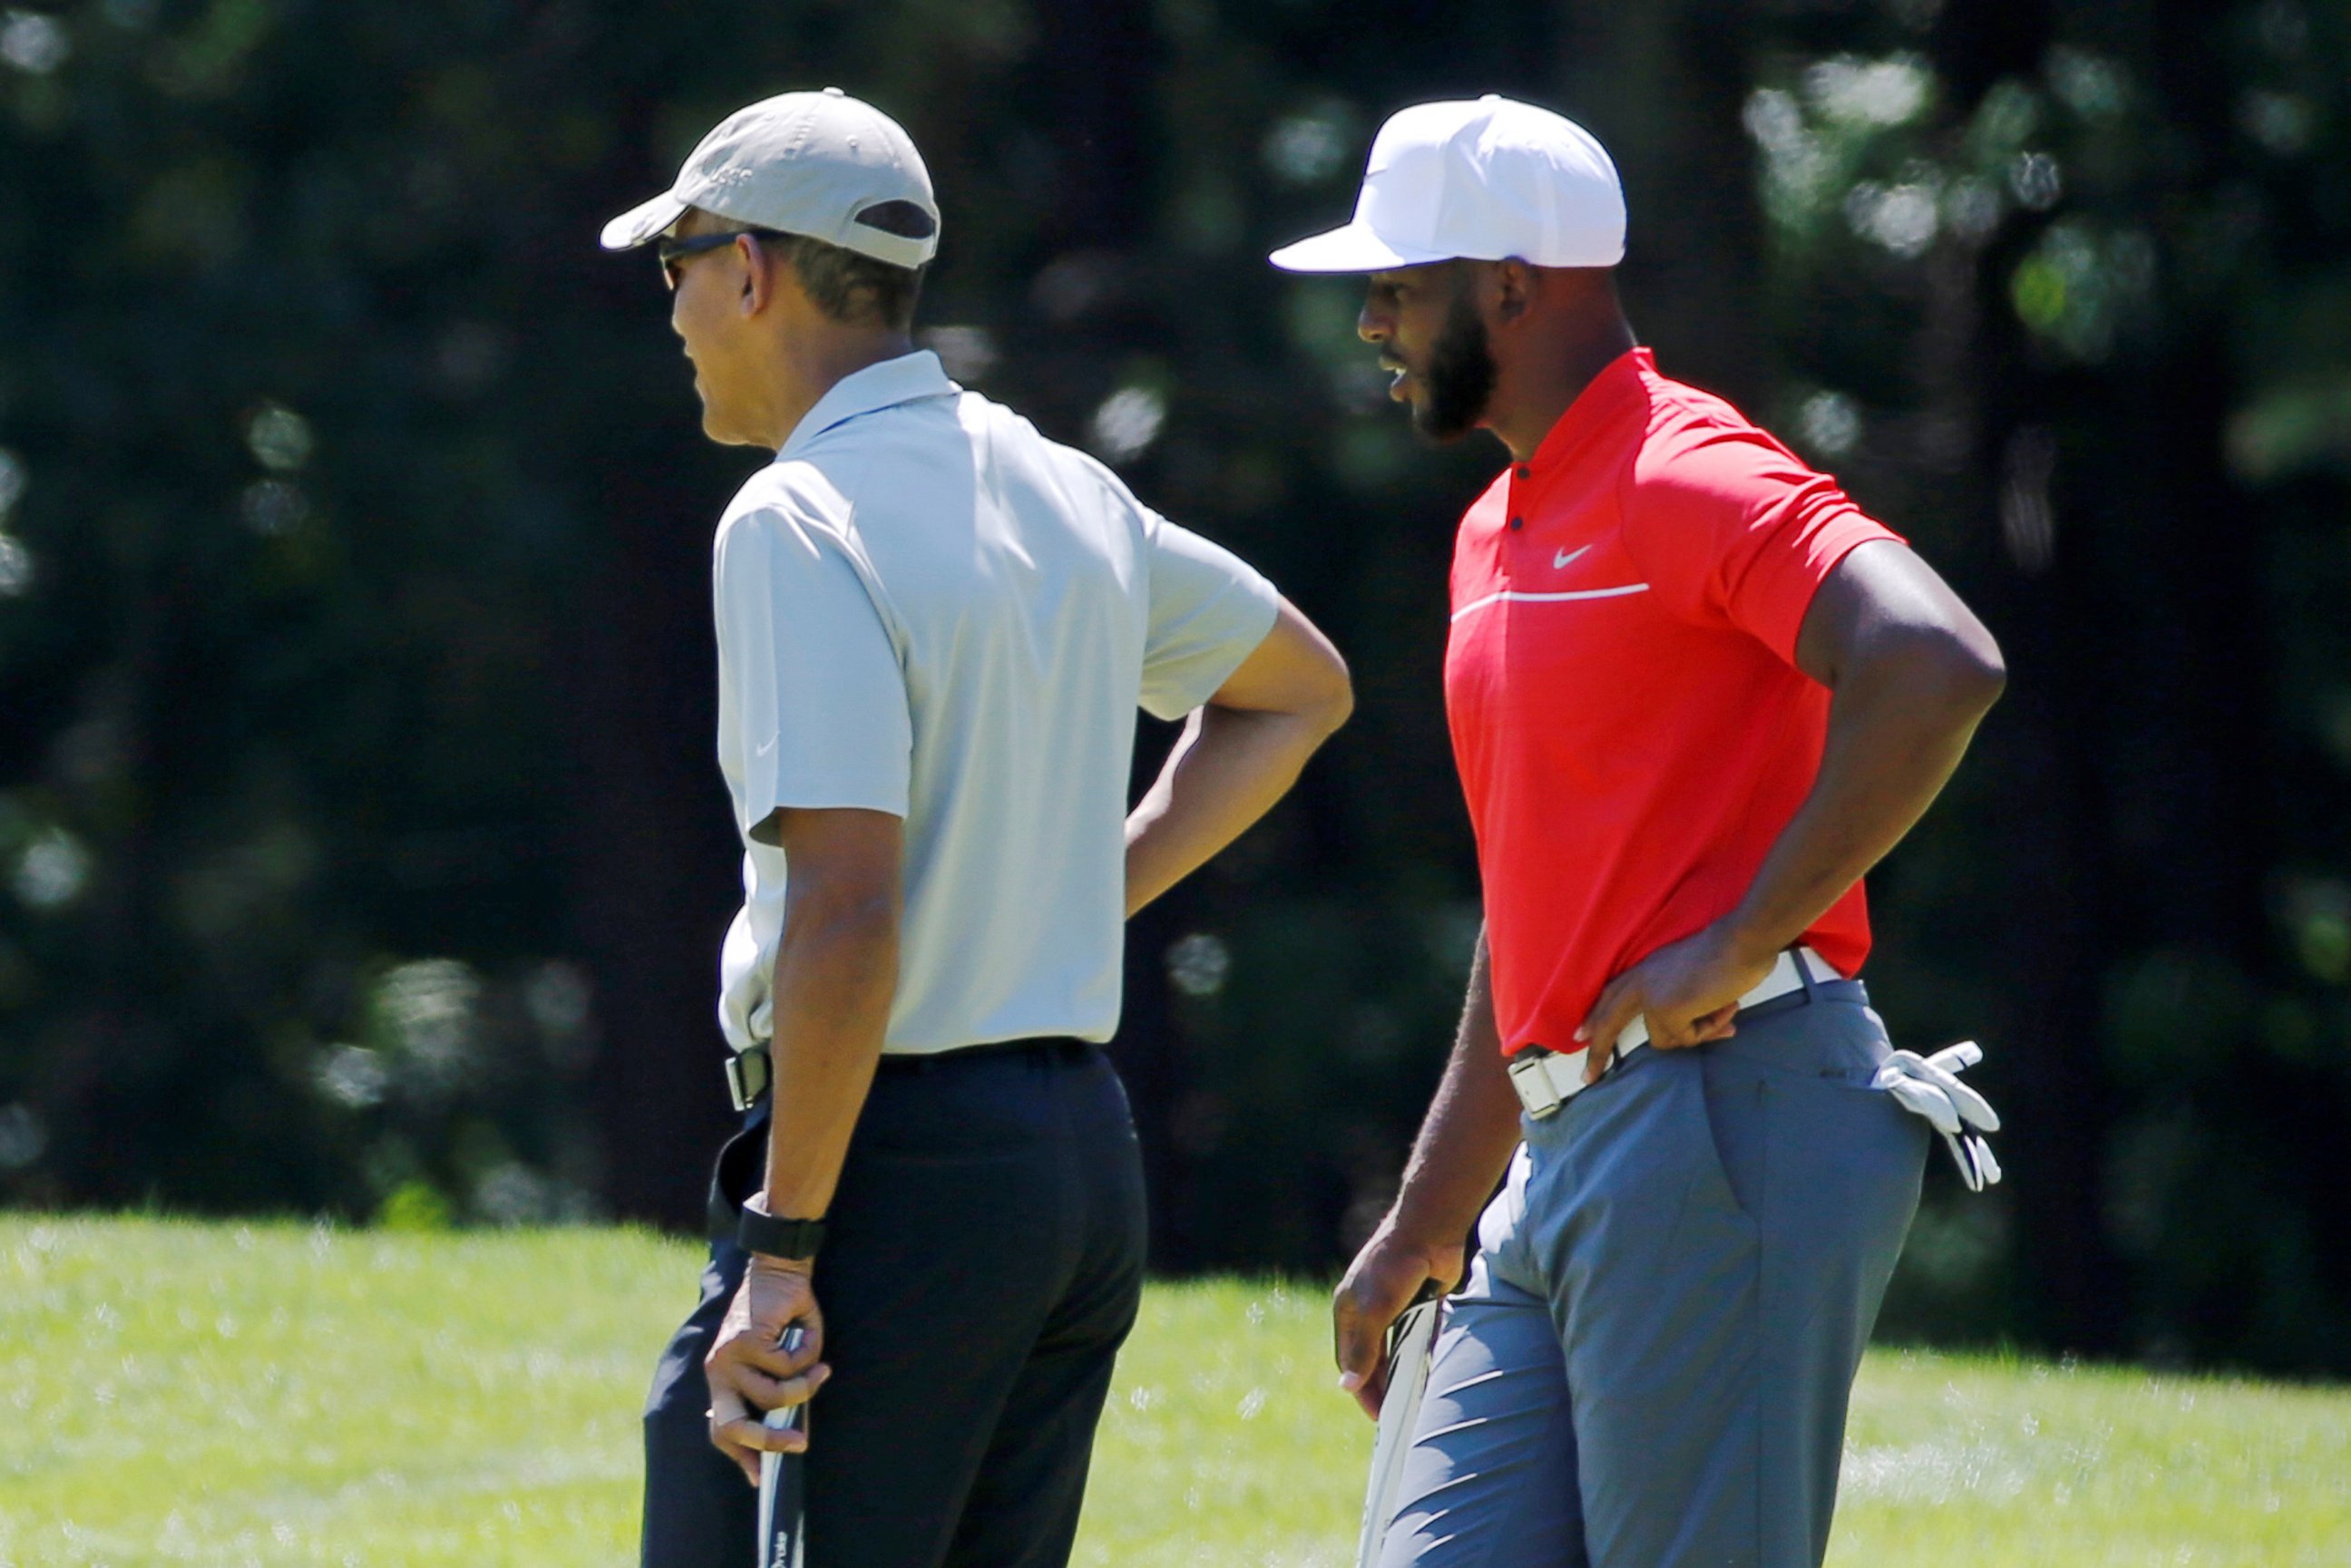 PHOTO: President Barack Obama and NBA basketball player Chris Paul of the Los Angeles Clippers play golf at Farm Neck Golf Club during Obama's annual summer vacation on Martha's Vineyard, in Oak Bluffs, Massachusetts, Aug. 7, 2016.